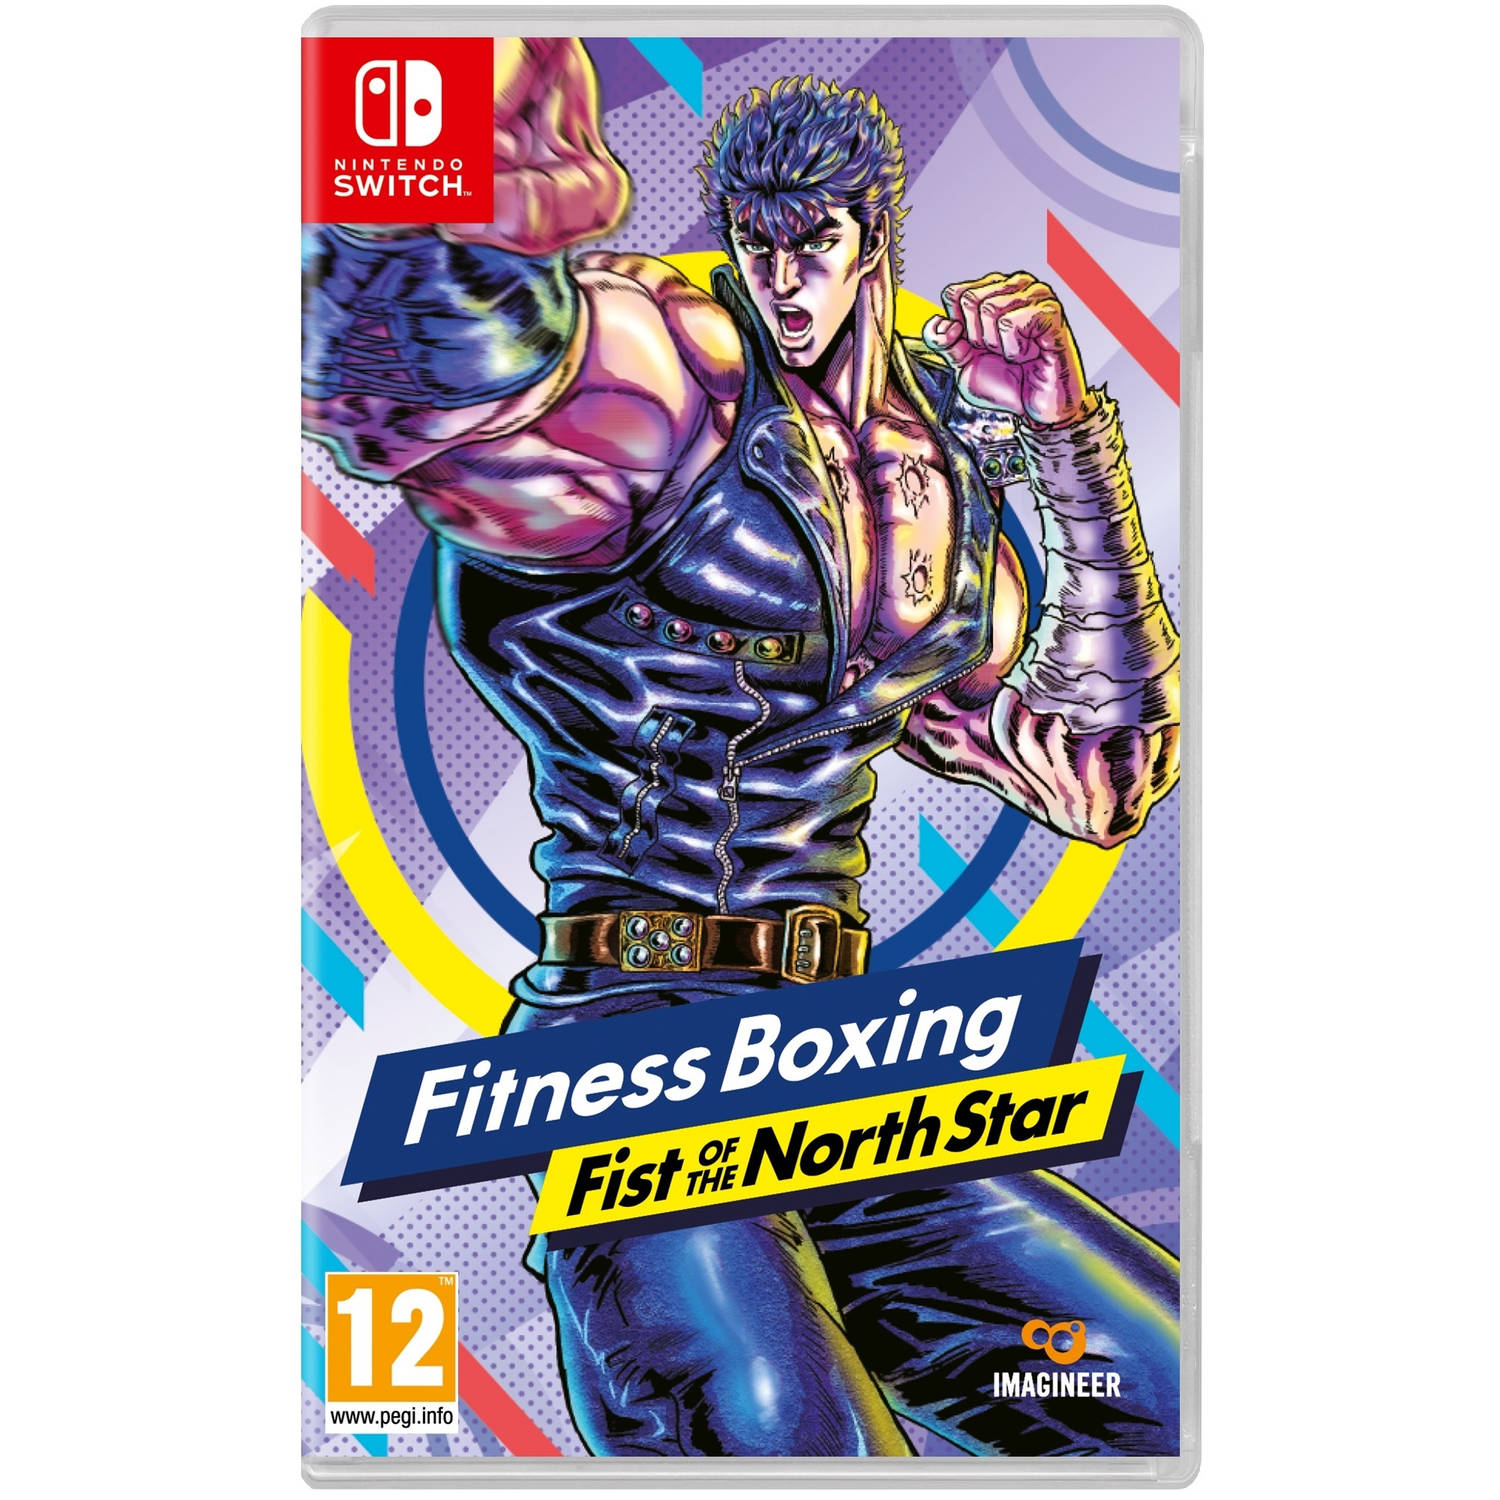 Fitness Boxing Fist of the Northstar Nintendo Switch